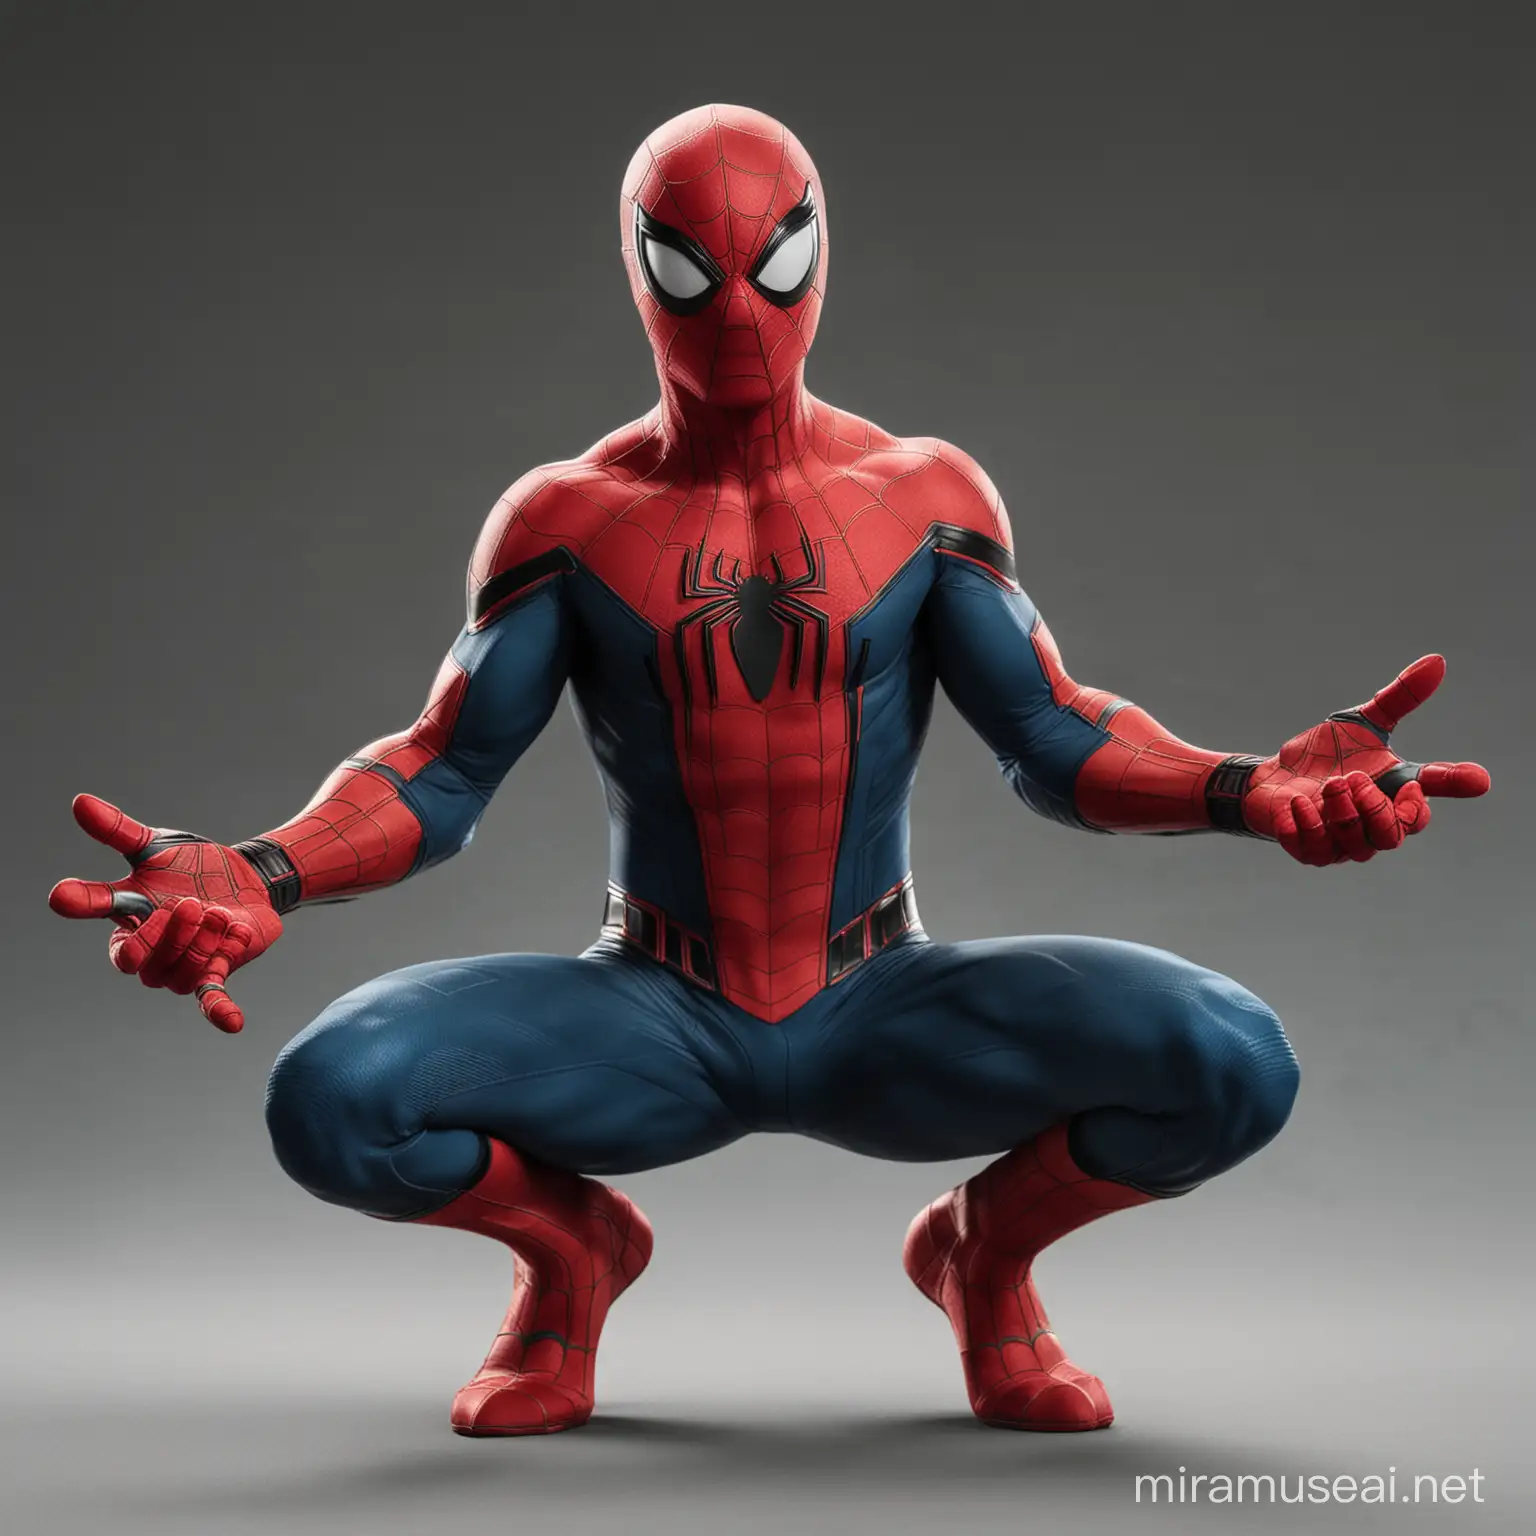 Practicing drawing some action poses with Spider-Man : r/Marvel